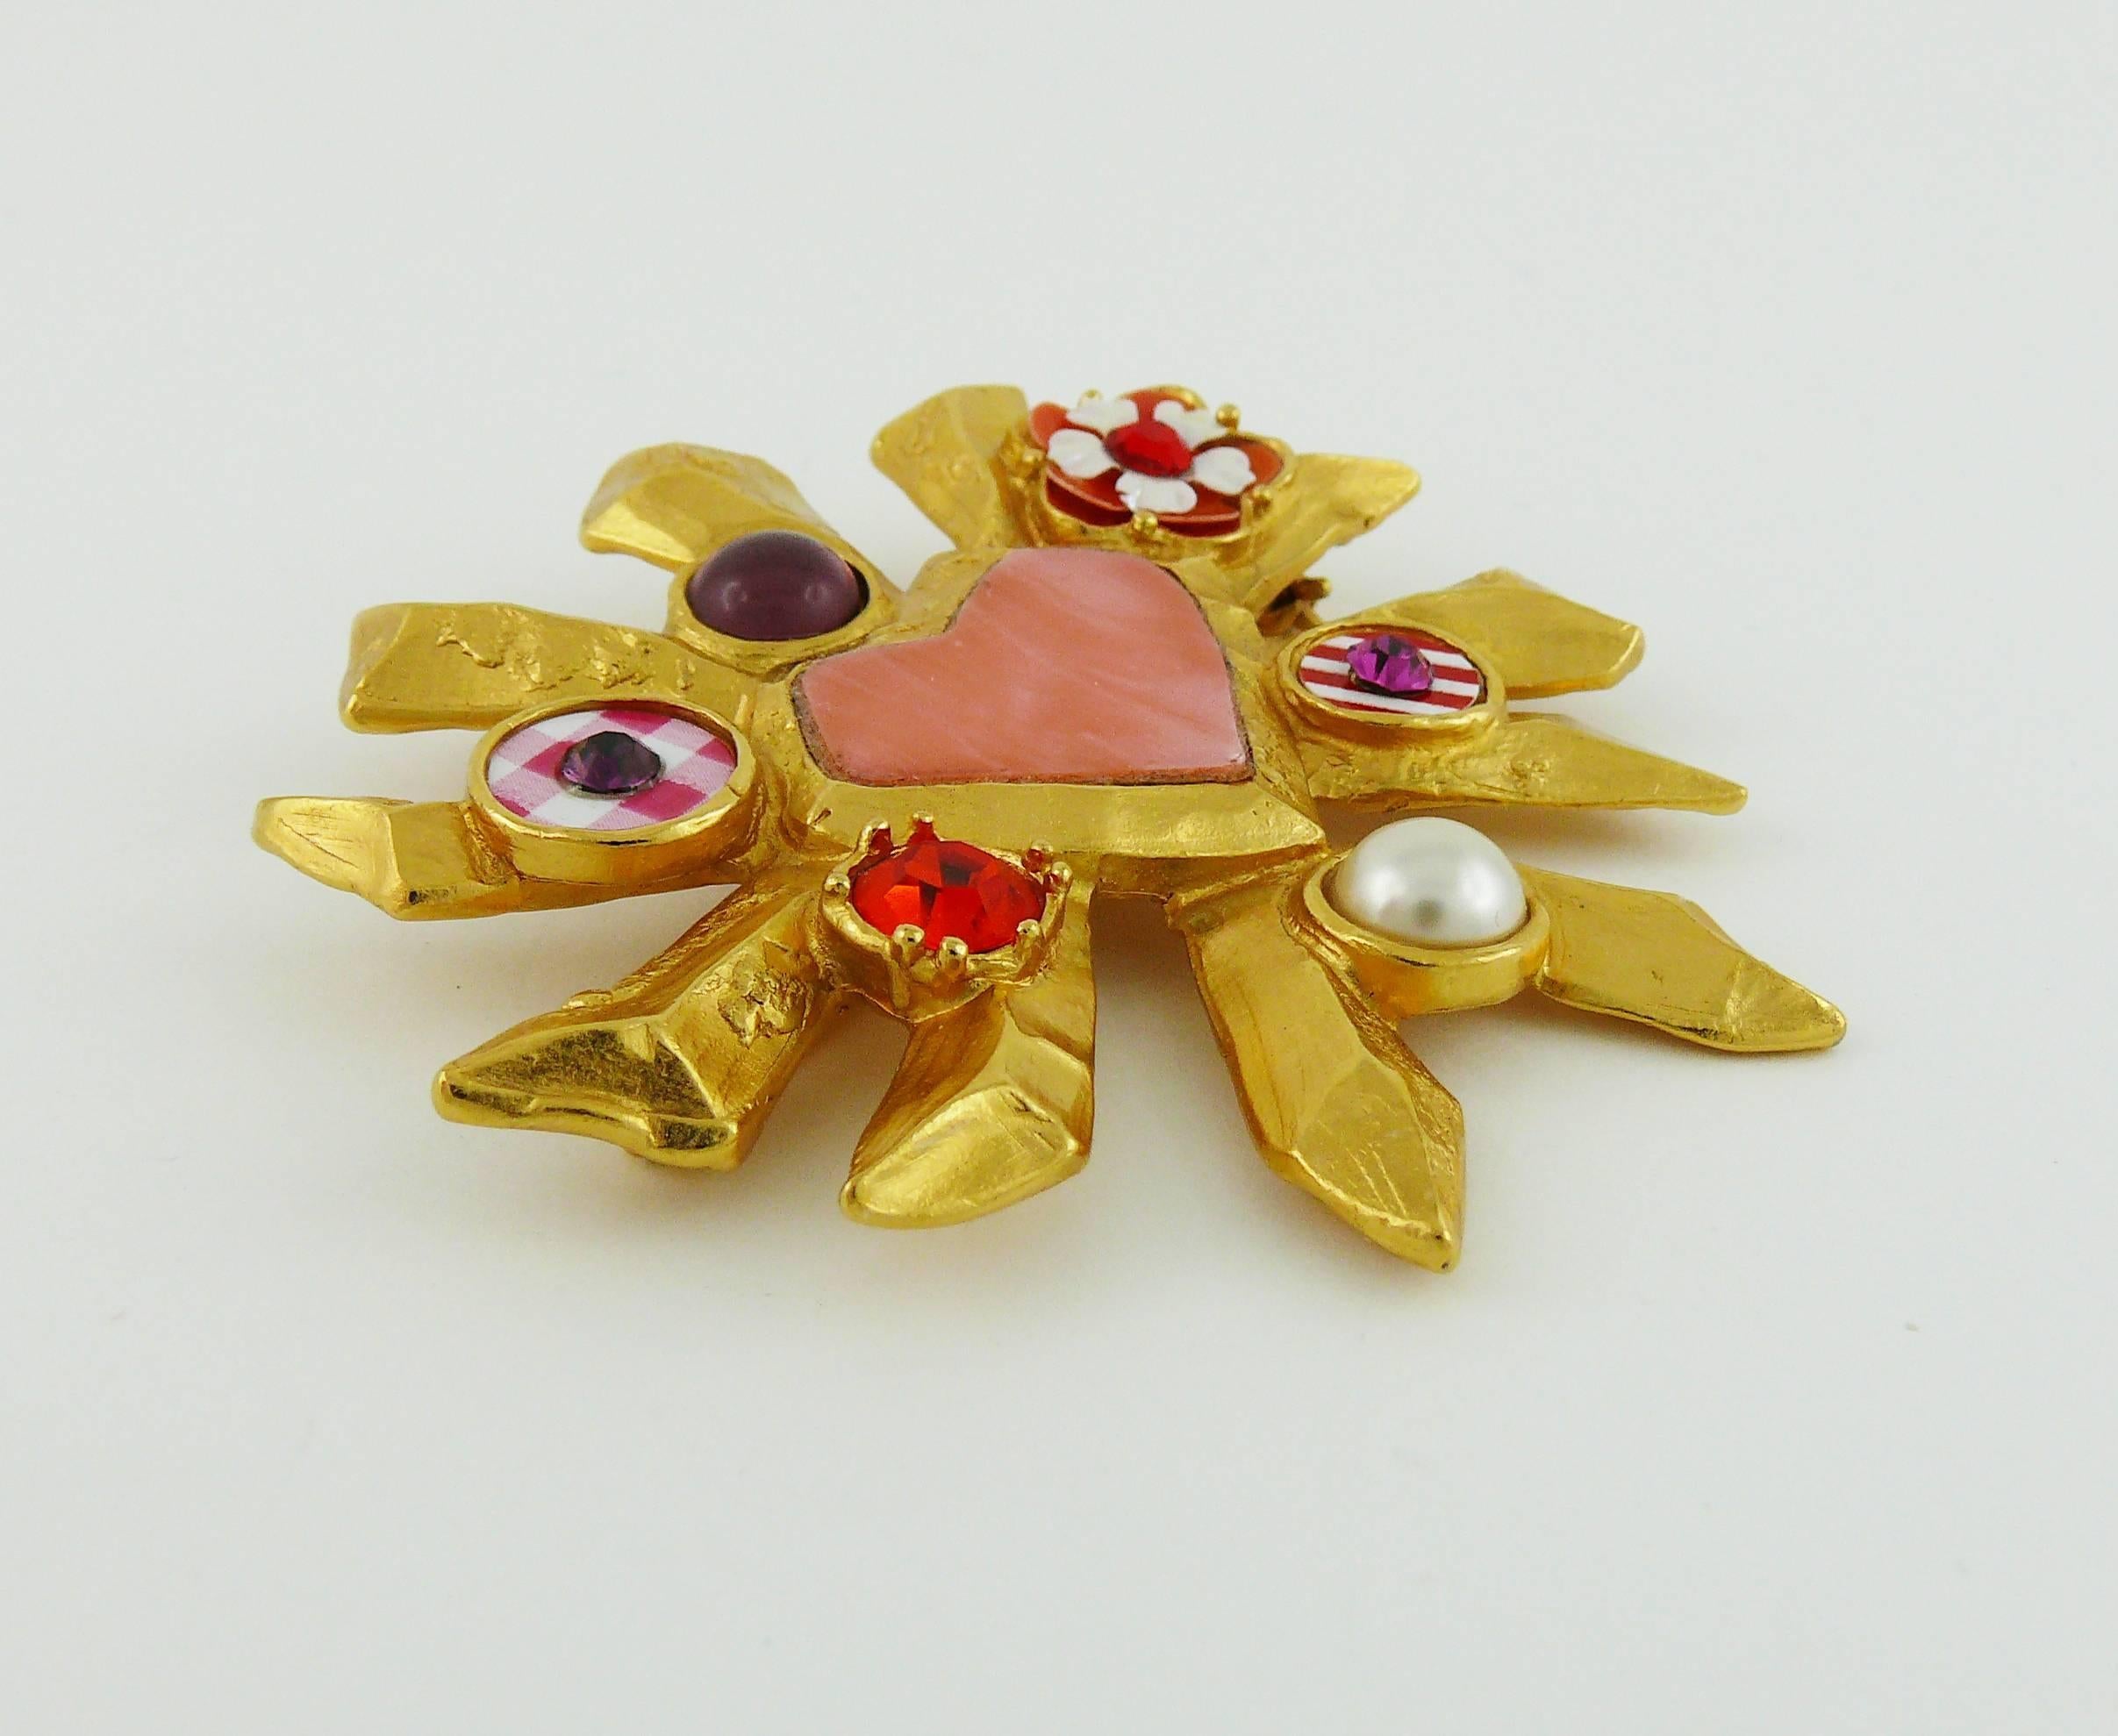 CHRISTIAN LACROIX vintage iconic radiant heart brooch embellished with faux pearl, multi colored crystals, glass cabochon and rhodoid details.

Marked CHRISTIAN LACROIX CL Made in France.

JEWELRY CONDITION CHART
- New or never worn : item is in